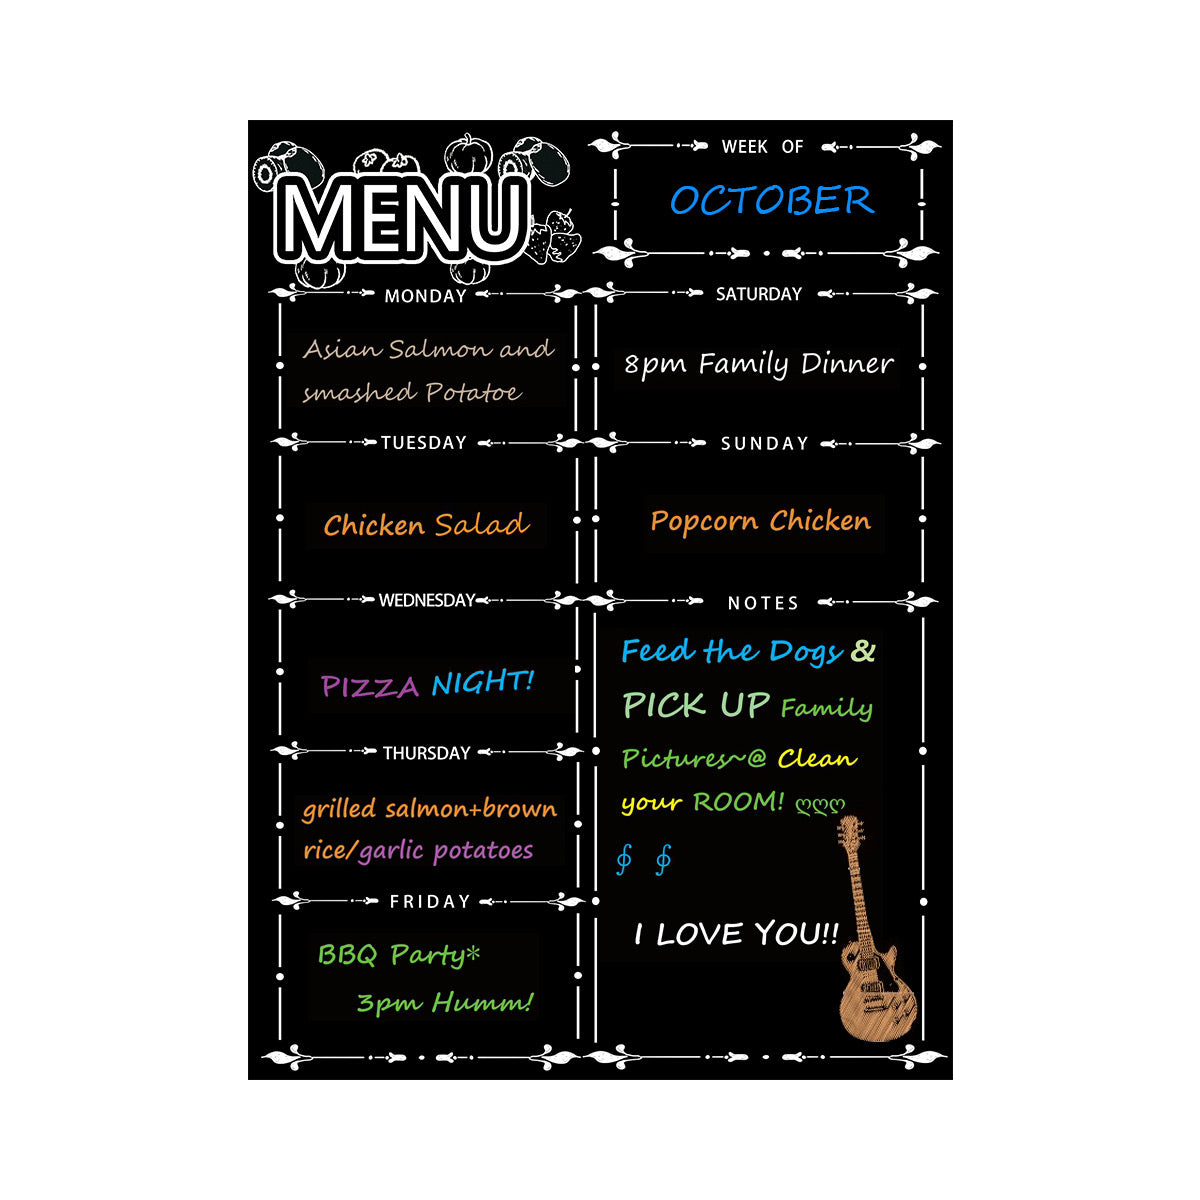 Fridge Dry Erase Board Calendar, Alaman Magnetic Refrigerator Dry Eraser Weekly Menu Meal Planner Family Calendar Organiser 16" x 12" Weekly Menu Planner with Grocery List and Notes (Black)